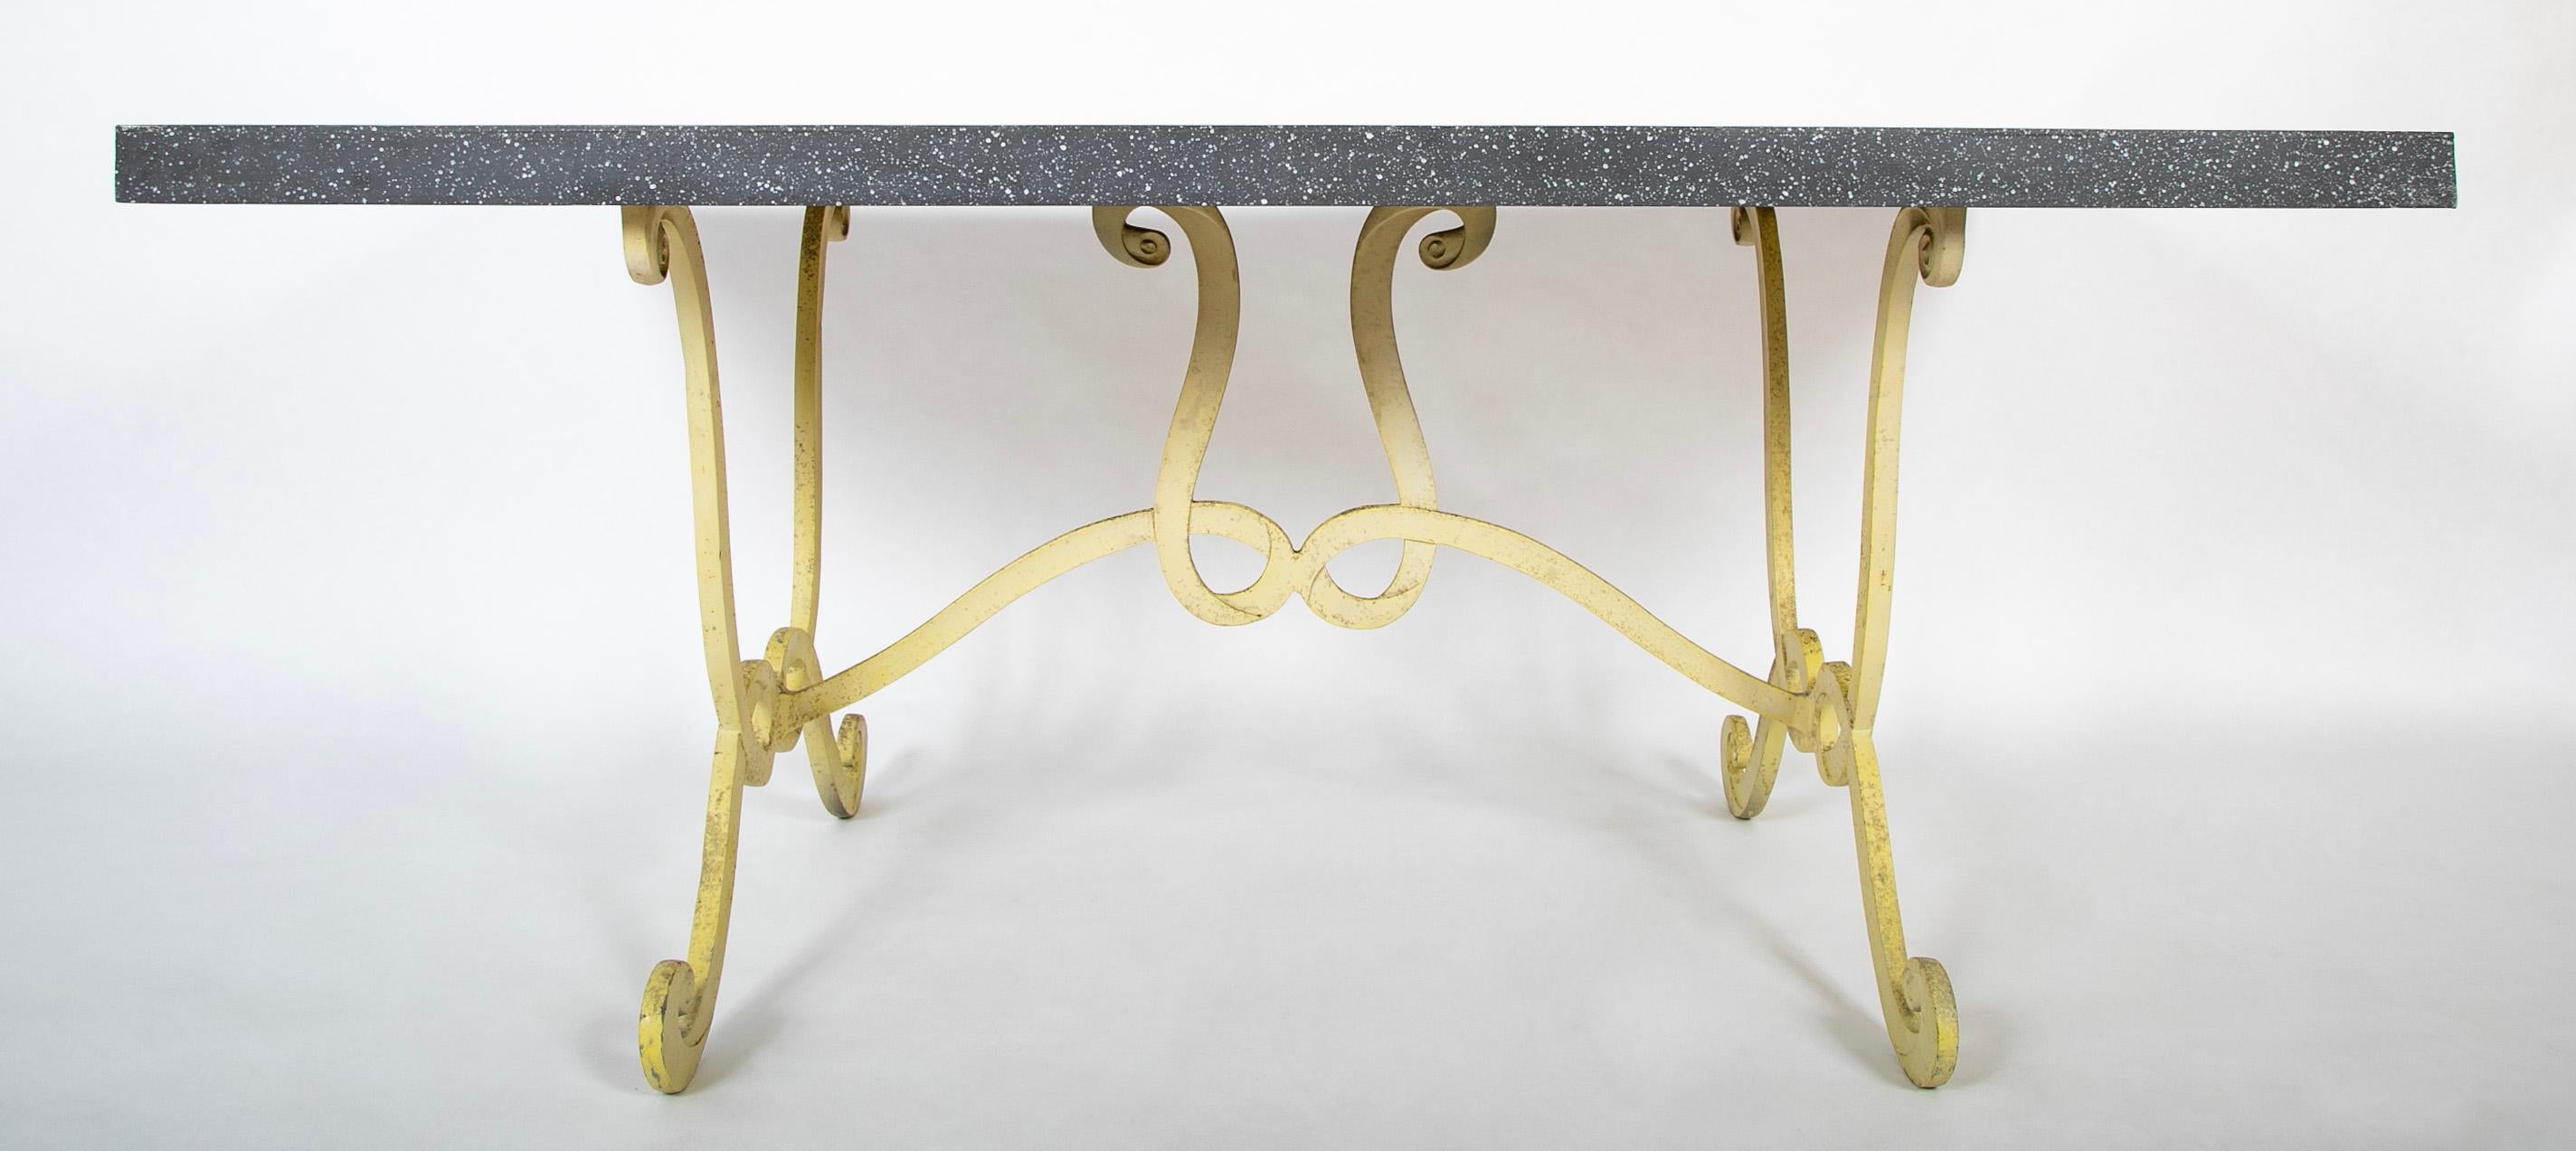 Painted Dorothy Draper Table With Faux Porphyry Steel Top And Yellow Wrought Iron Base For Sale